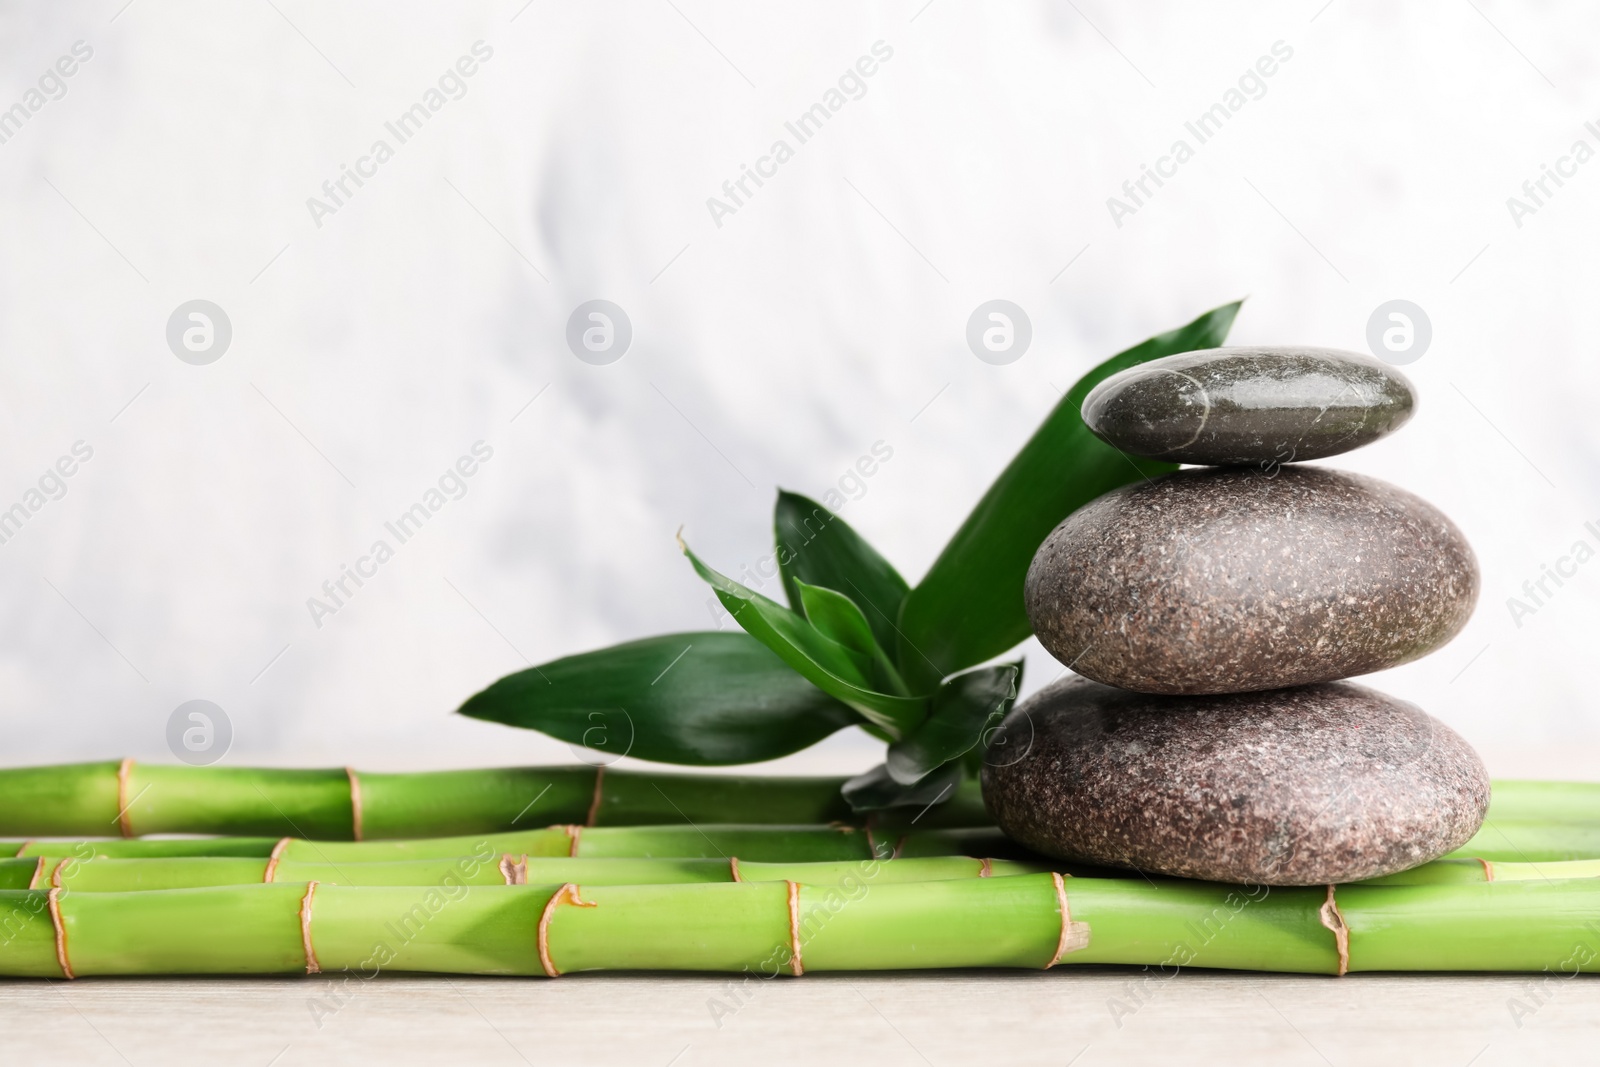 Photo of Stacked spa stones on bamboo stems against light blurred background. Space for text